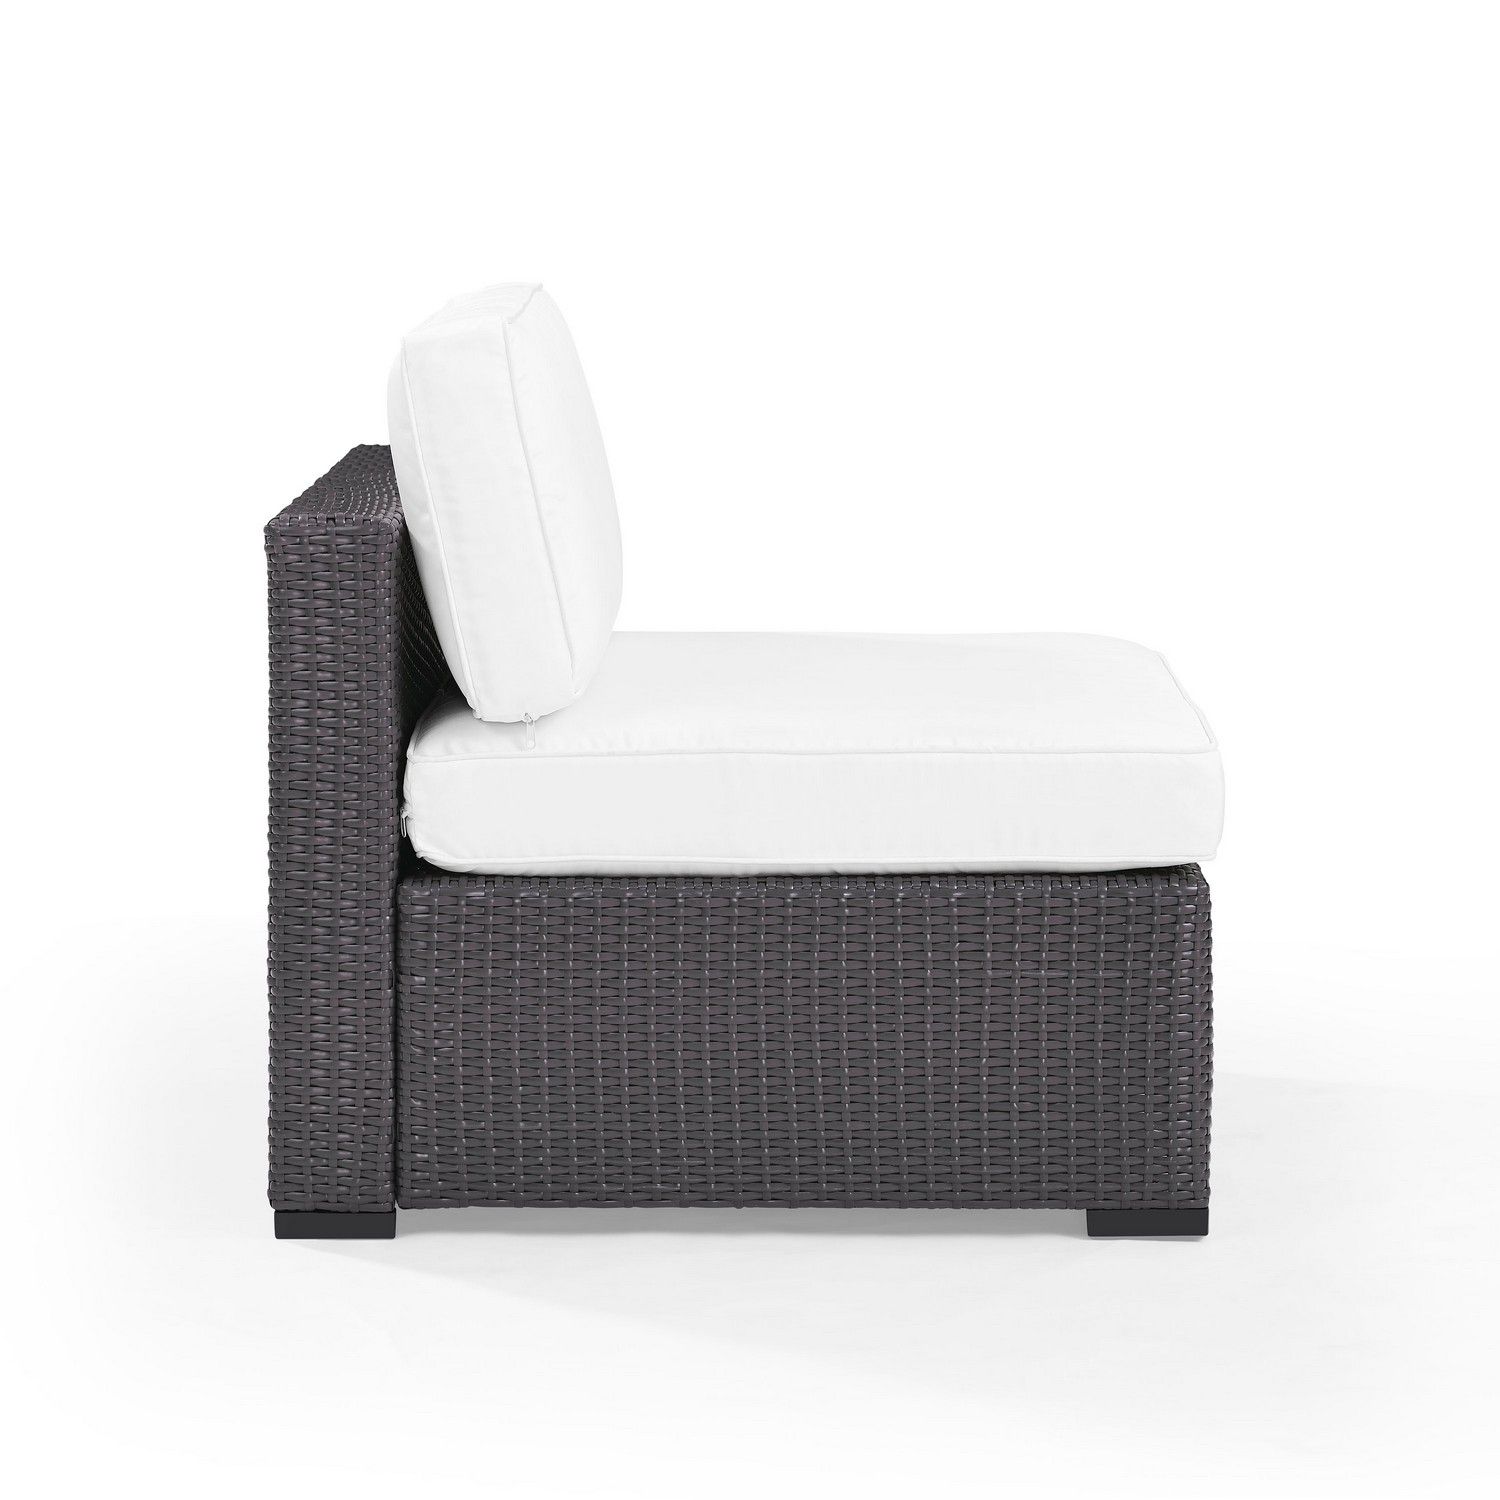 Crosley Biscayne Outdoor Wicker Armless Chair - White/Brown